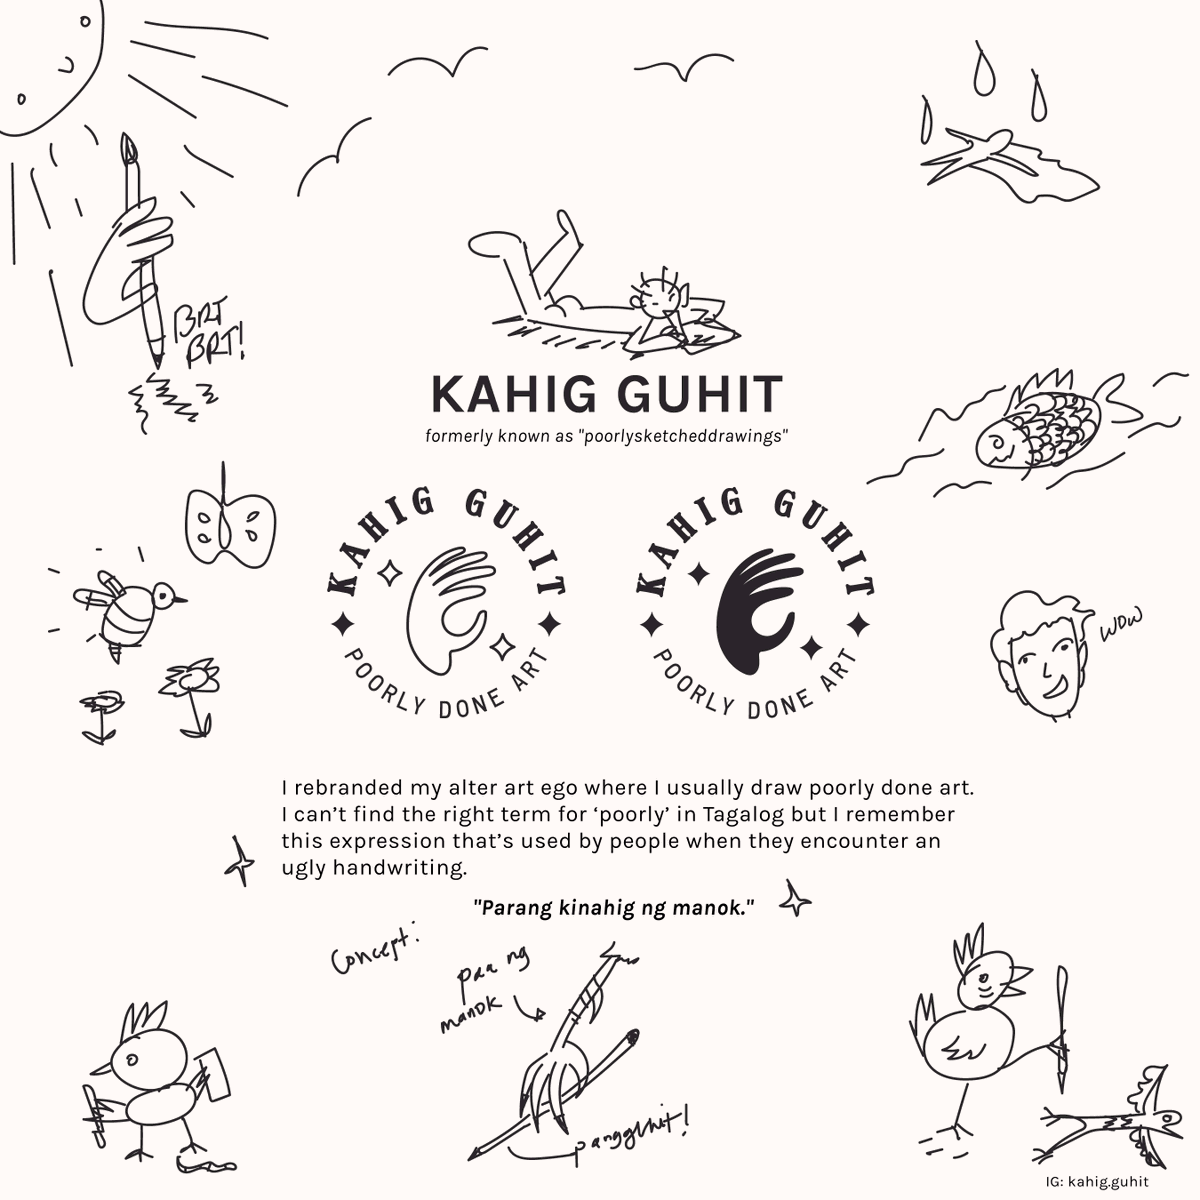 Rebranded one of my art alter ego 'poorlysketcheddrawings' to 'kahig guhit' because a bumble person told me na sobrang haba daw :> 

I'll be posting new poorly done art soon there! So give it a follow on IG: kahig.guhit 

#artph 